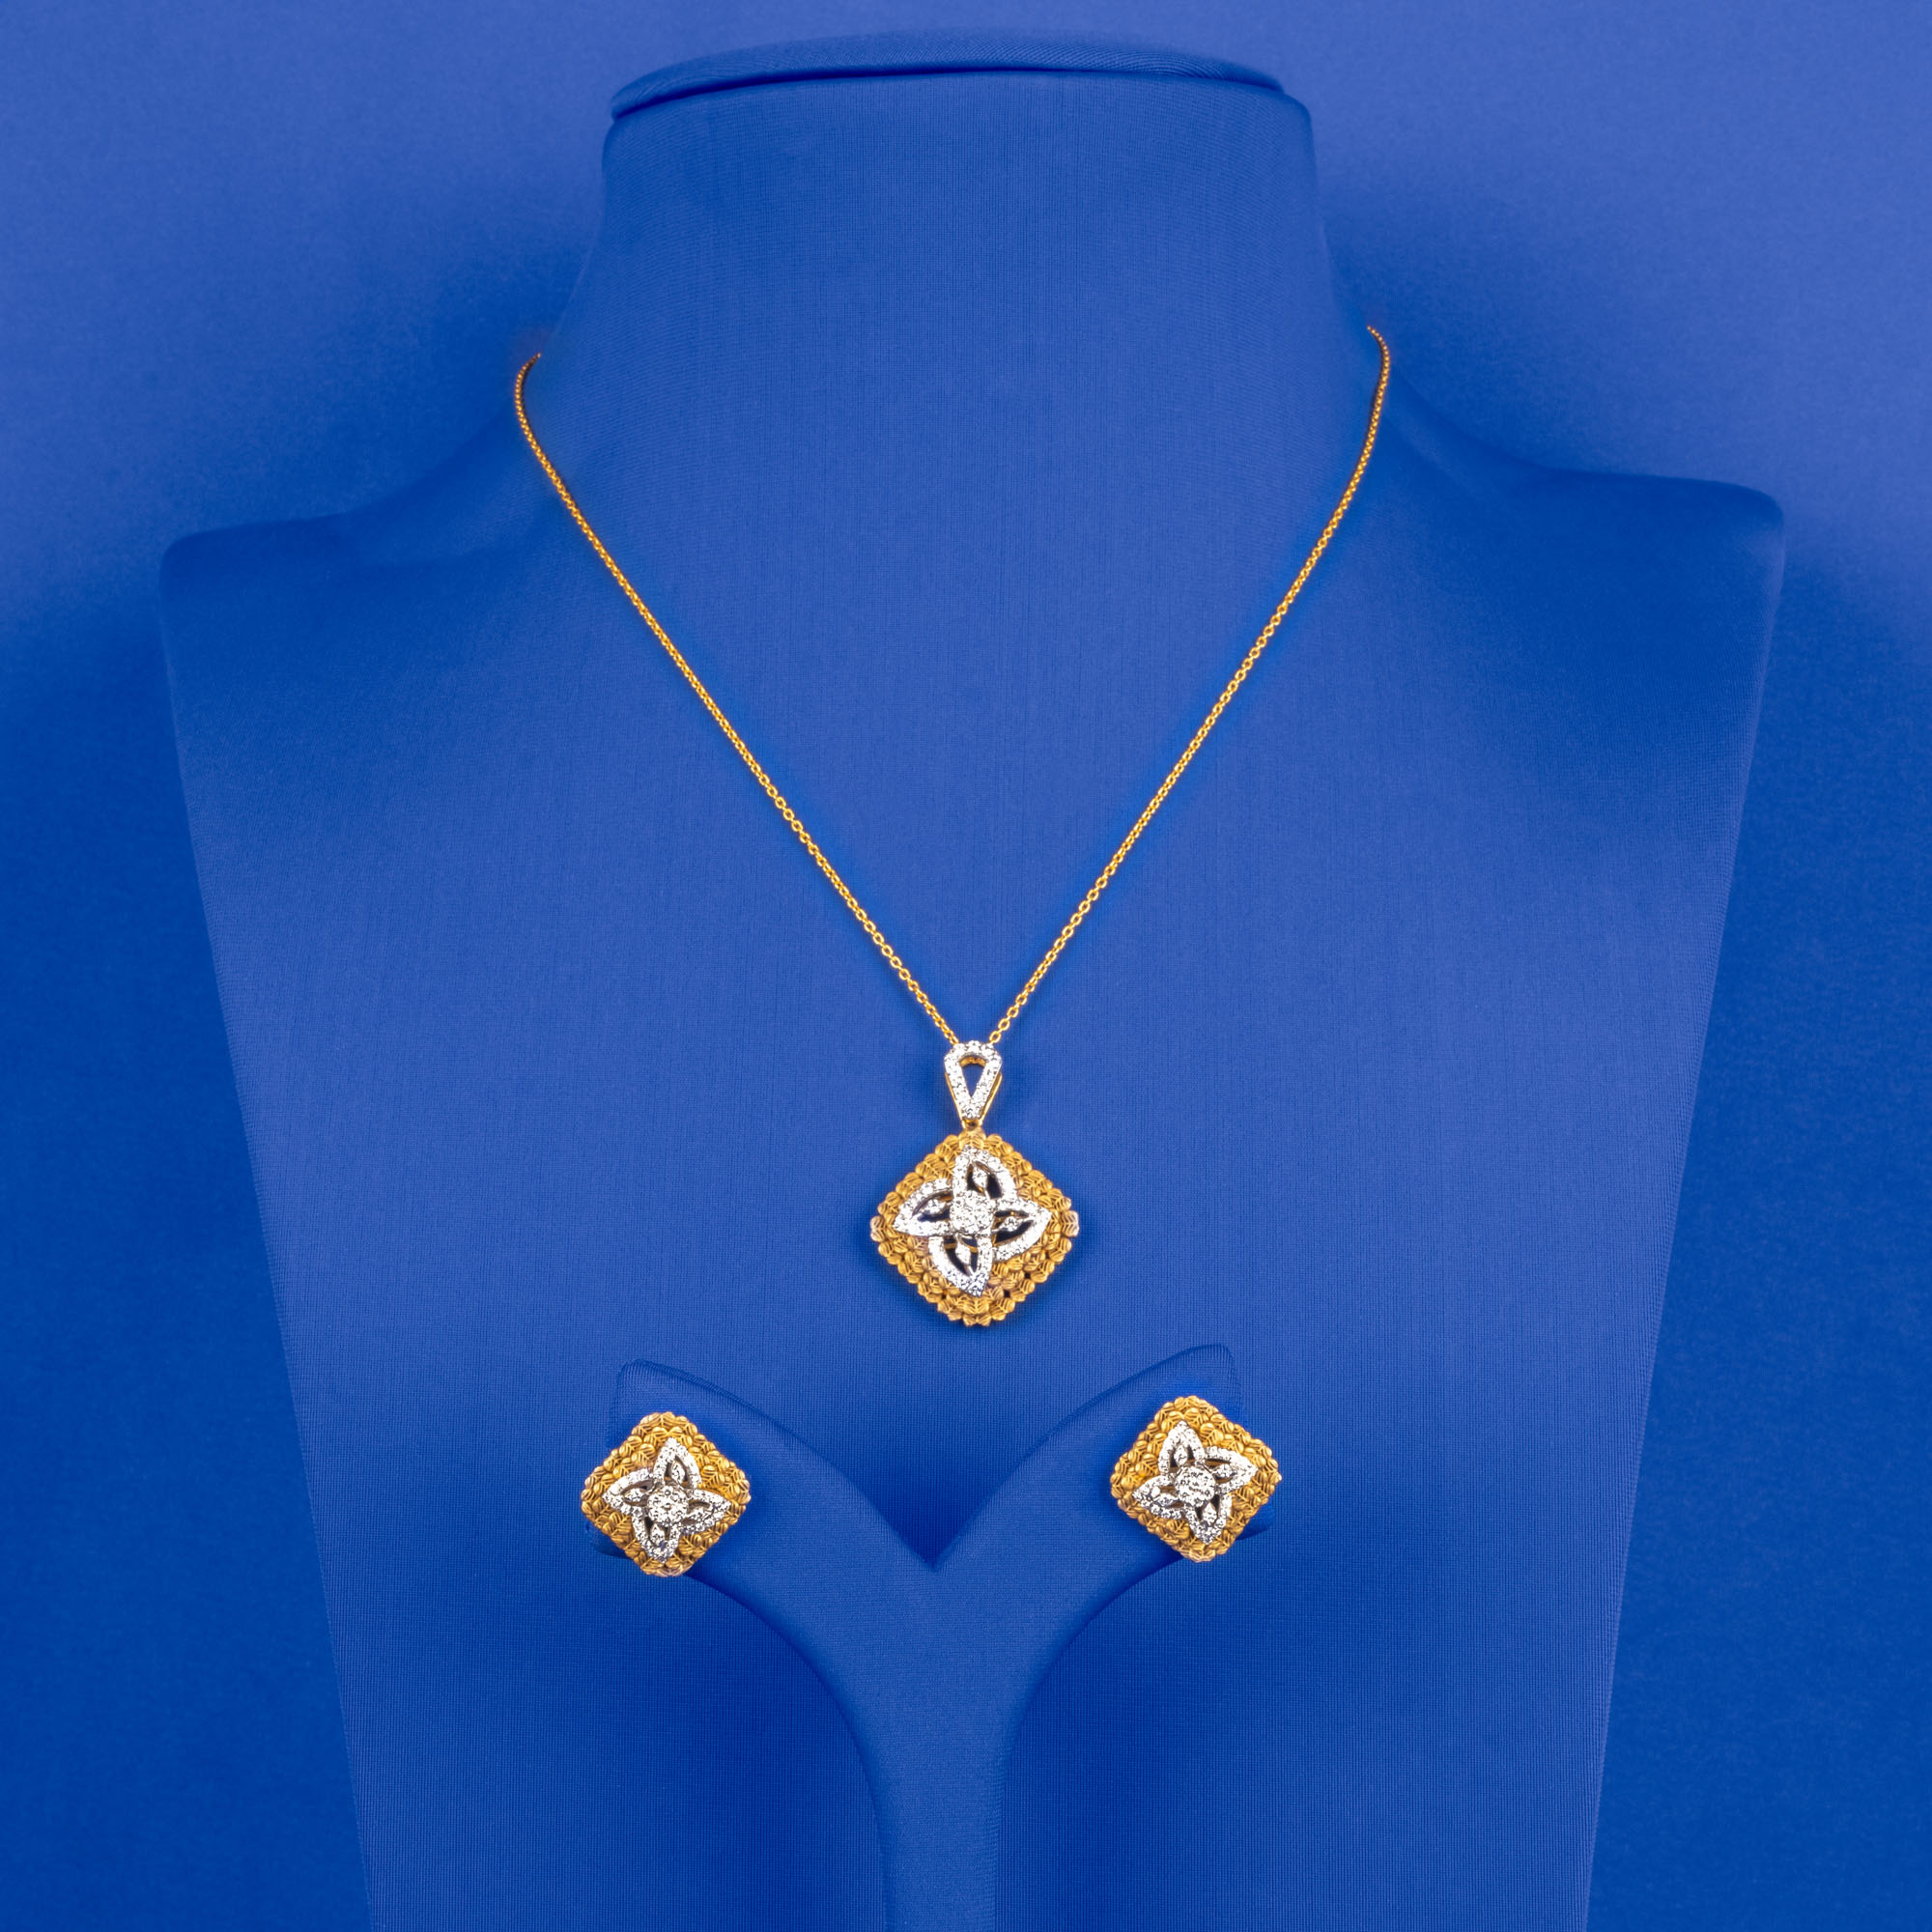 Handmade 18k Yellow Gold Diamond Pendant and Earrings Set (Chain not included)